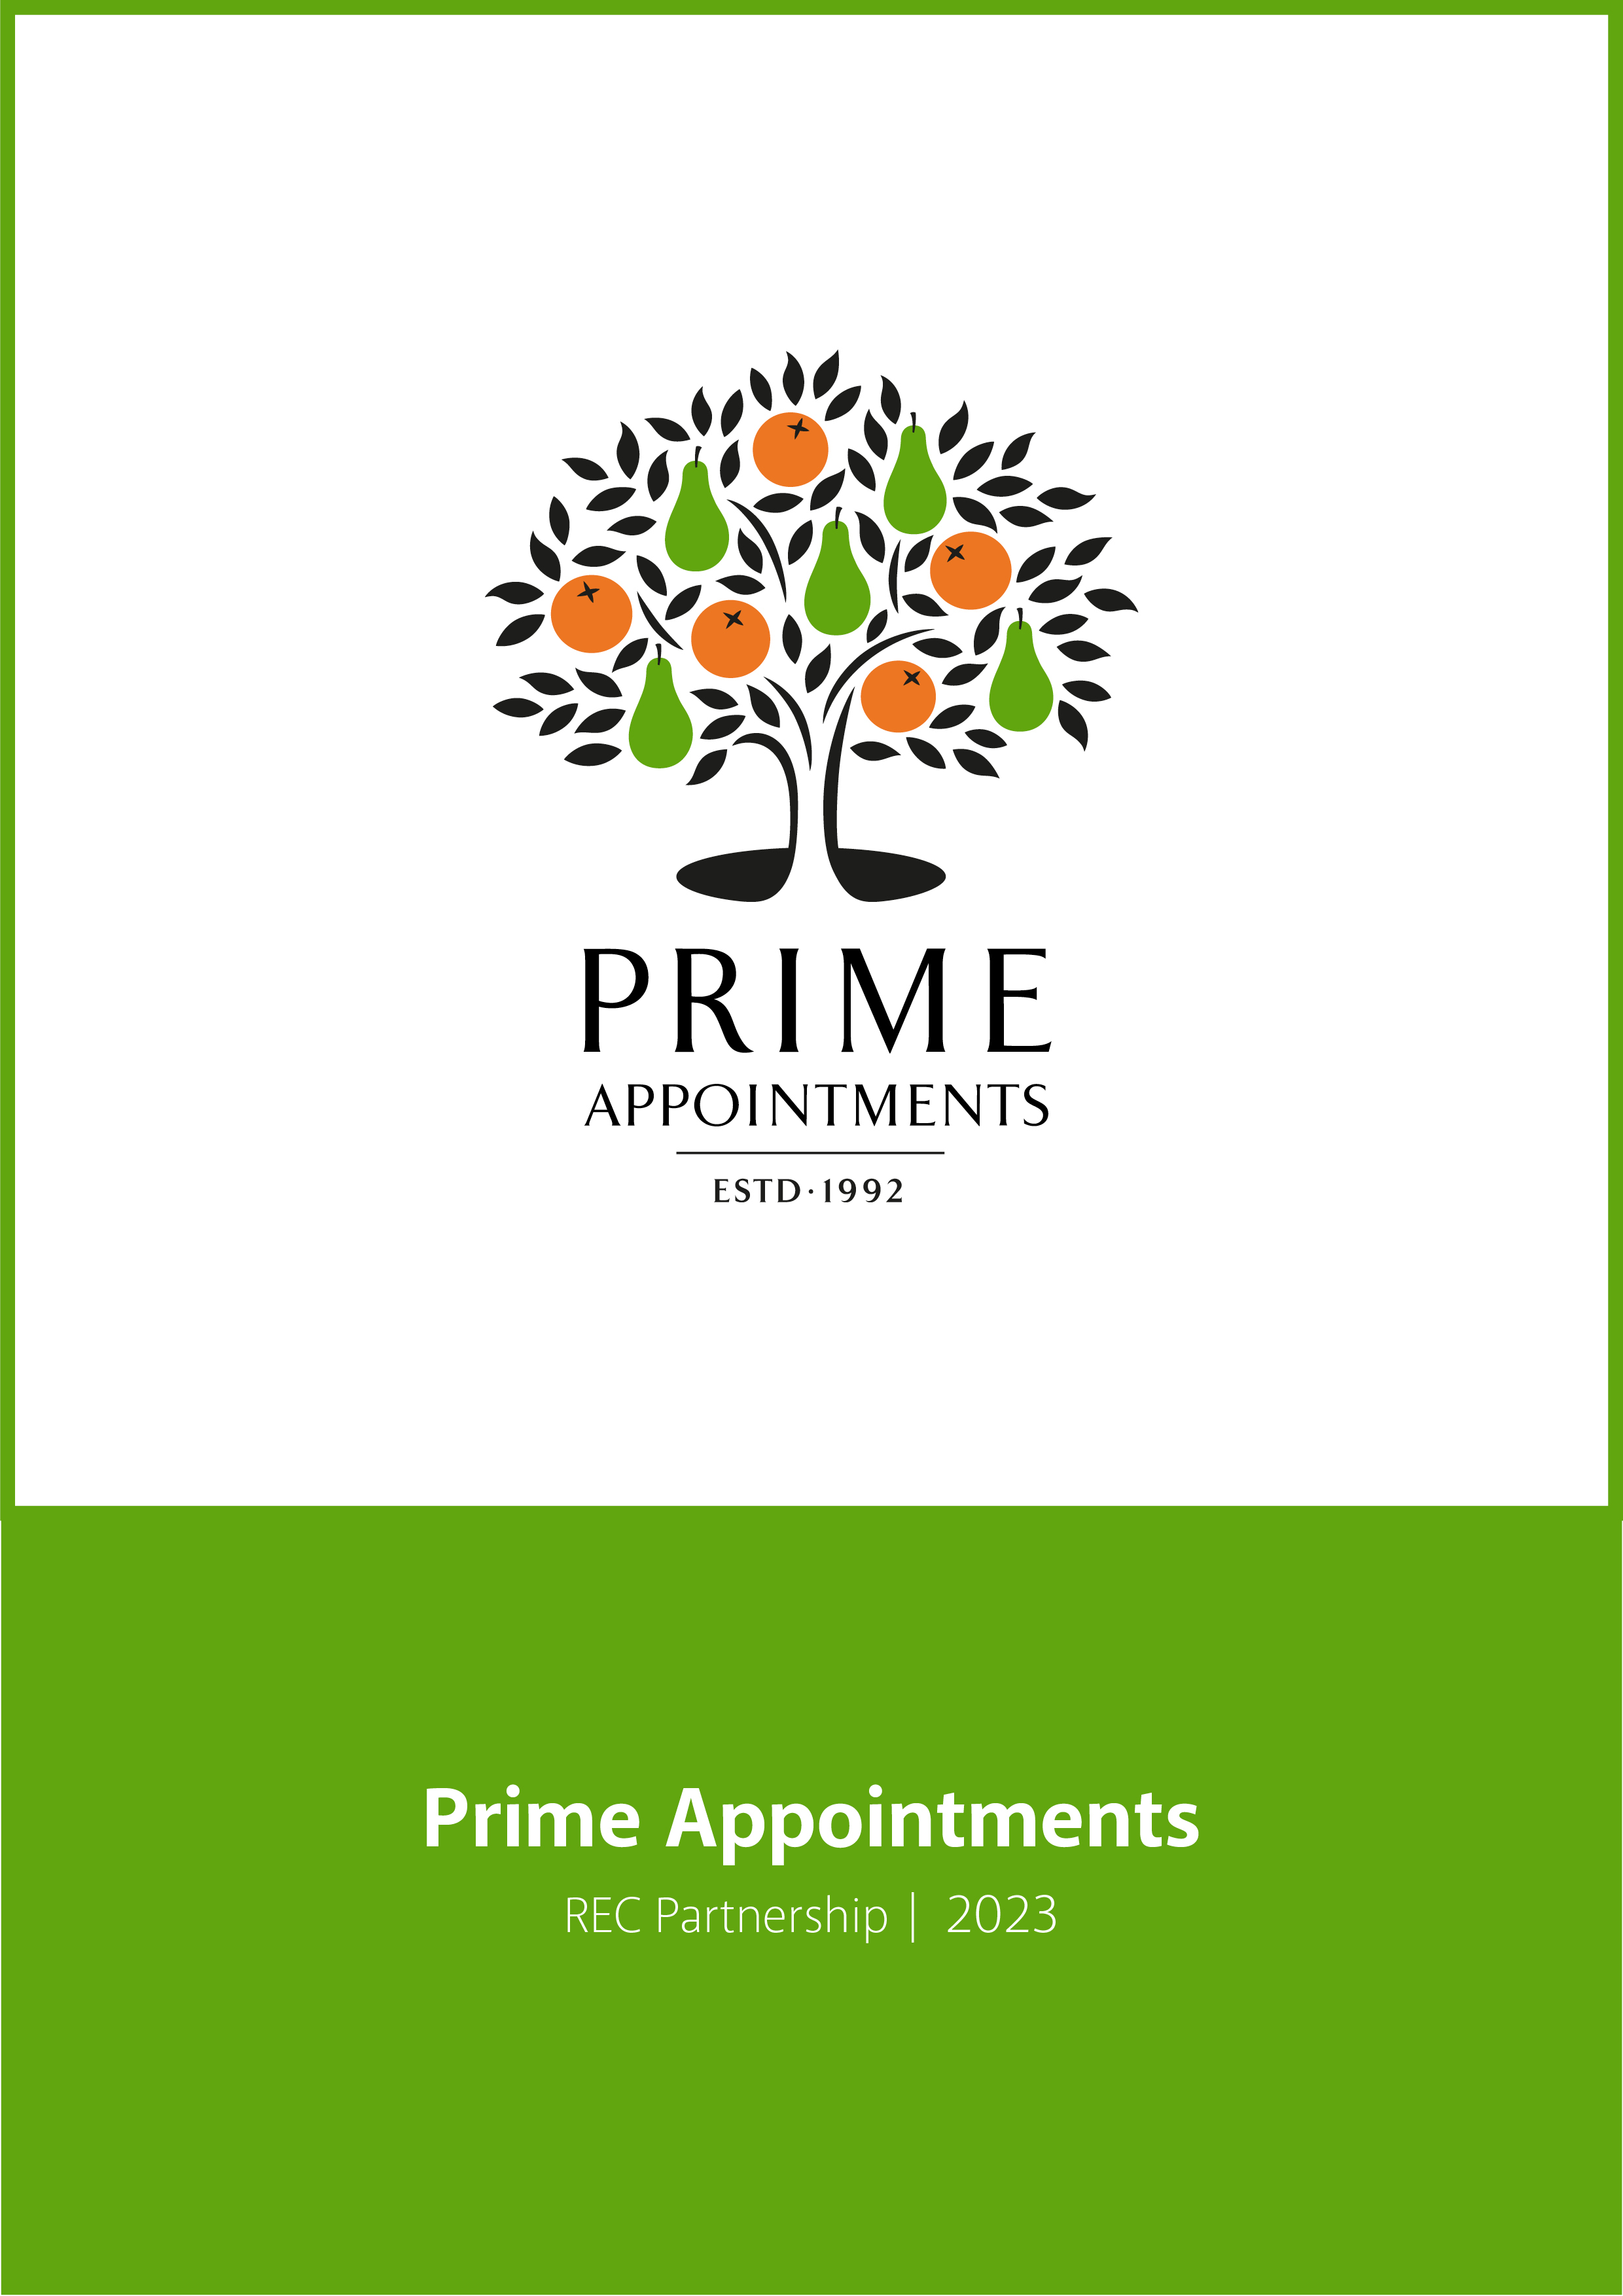 Prime Appointments REC Partnership Cover 2023